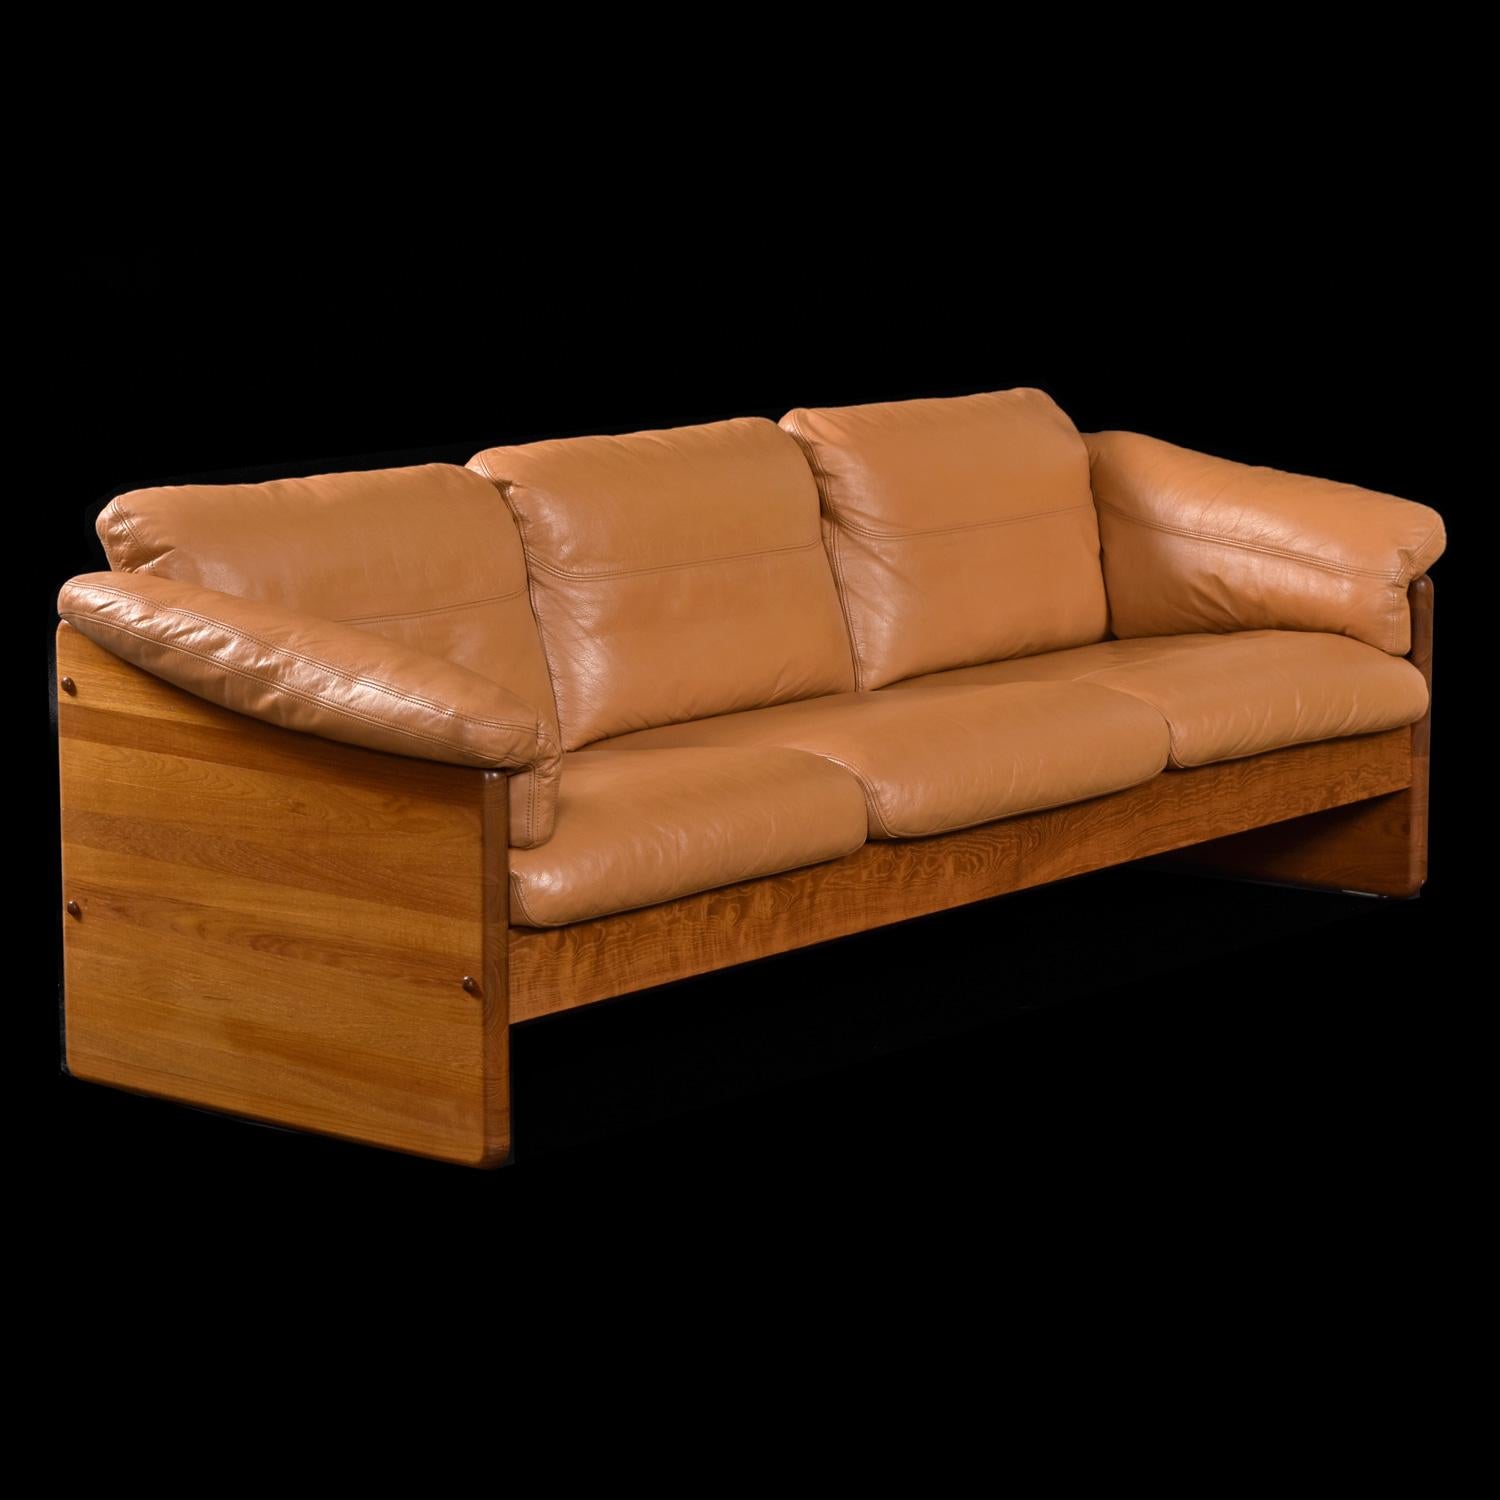 Solid Teak Original Cognac Leather  Danish 3-Seater Sofa by A. Mikael Laursen In Excellent Condition For Sale In Chattanooga, TN